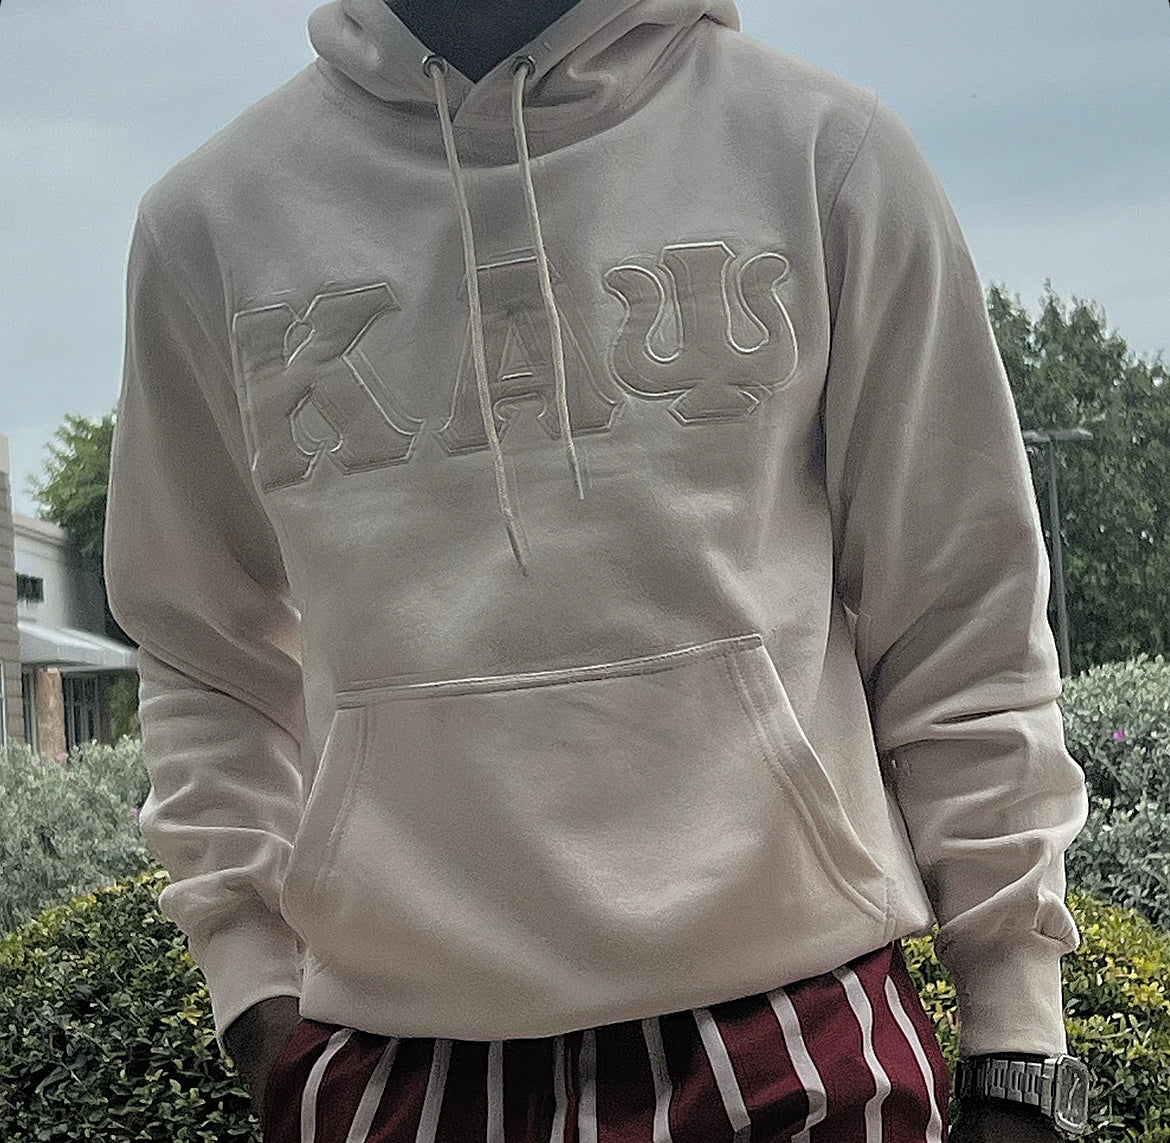 Exclusive Kappa Alpha Psi Embroidery Lettered Hoodie. This is the perfect long-sleeved hoodie to wear while showing off your Kappa Alpha Psi fraternity lettering. A comfortable cotton tee with a twill Greek letters embroidery across the chest give you the perfect fit. This hoodie is also a perfect gift or your favorite Kappa Man.